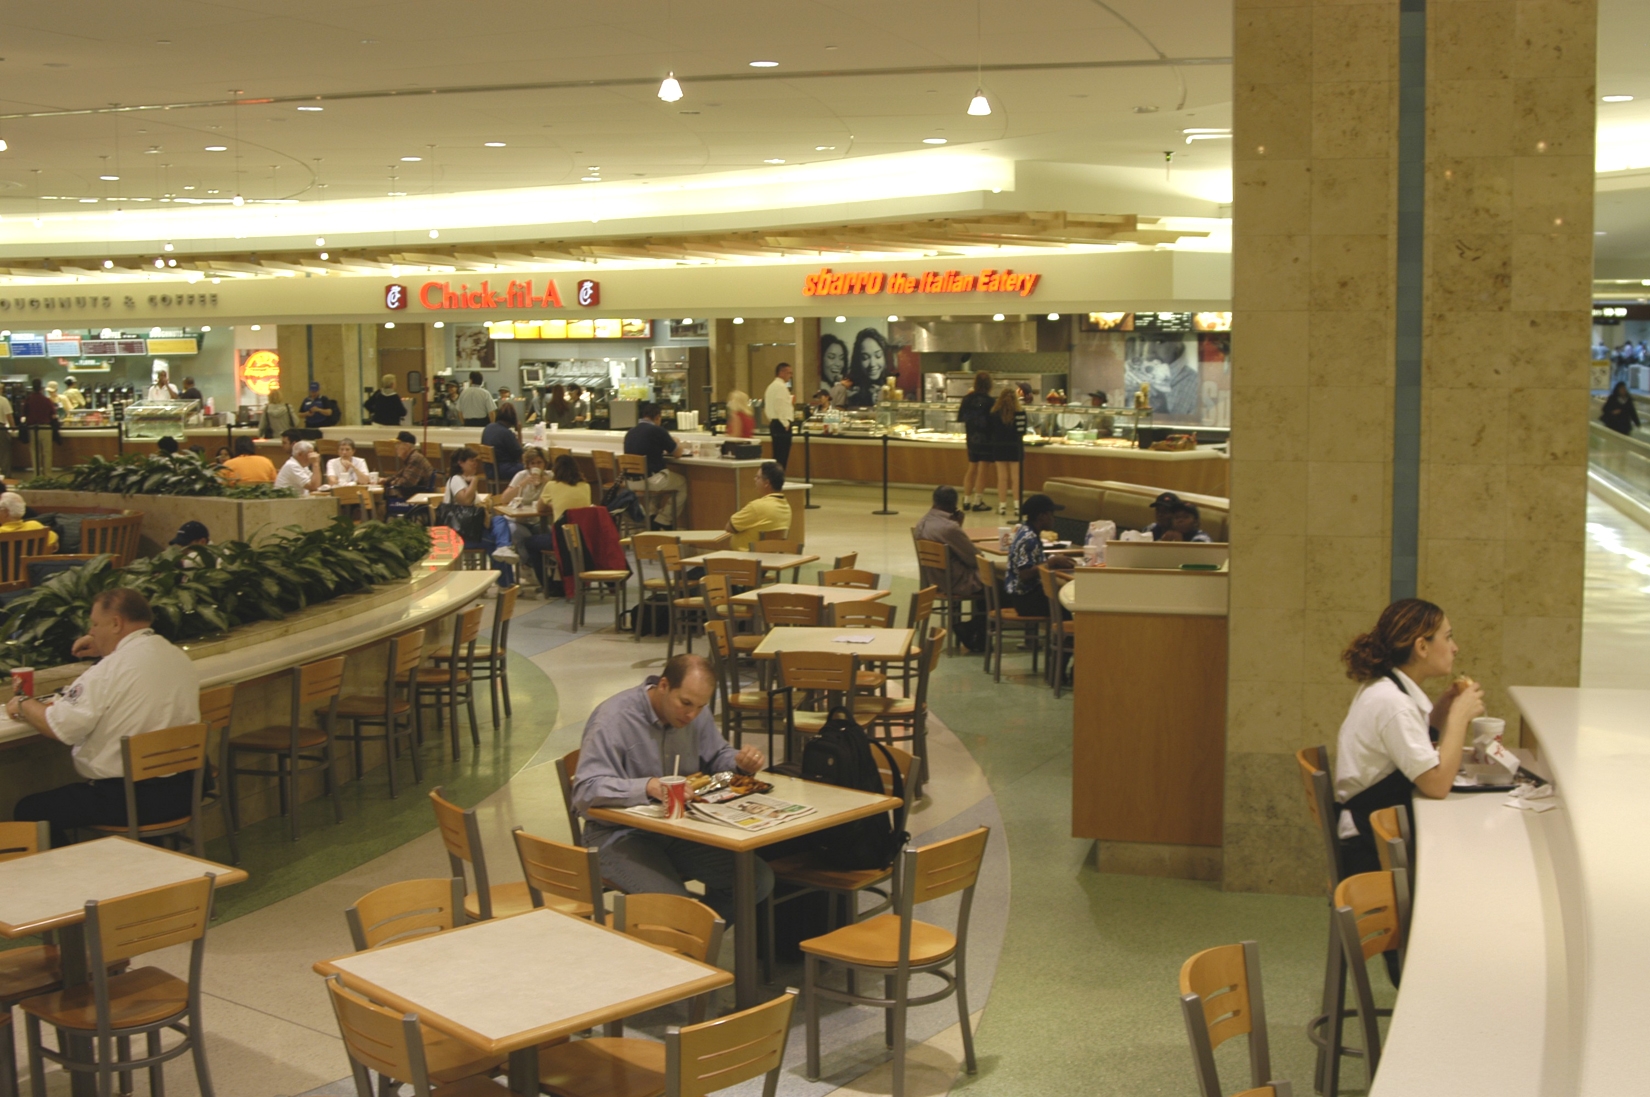 Food Court Seating